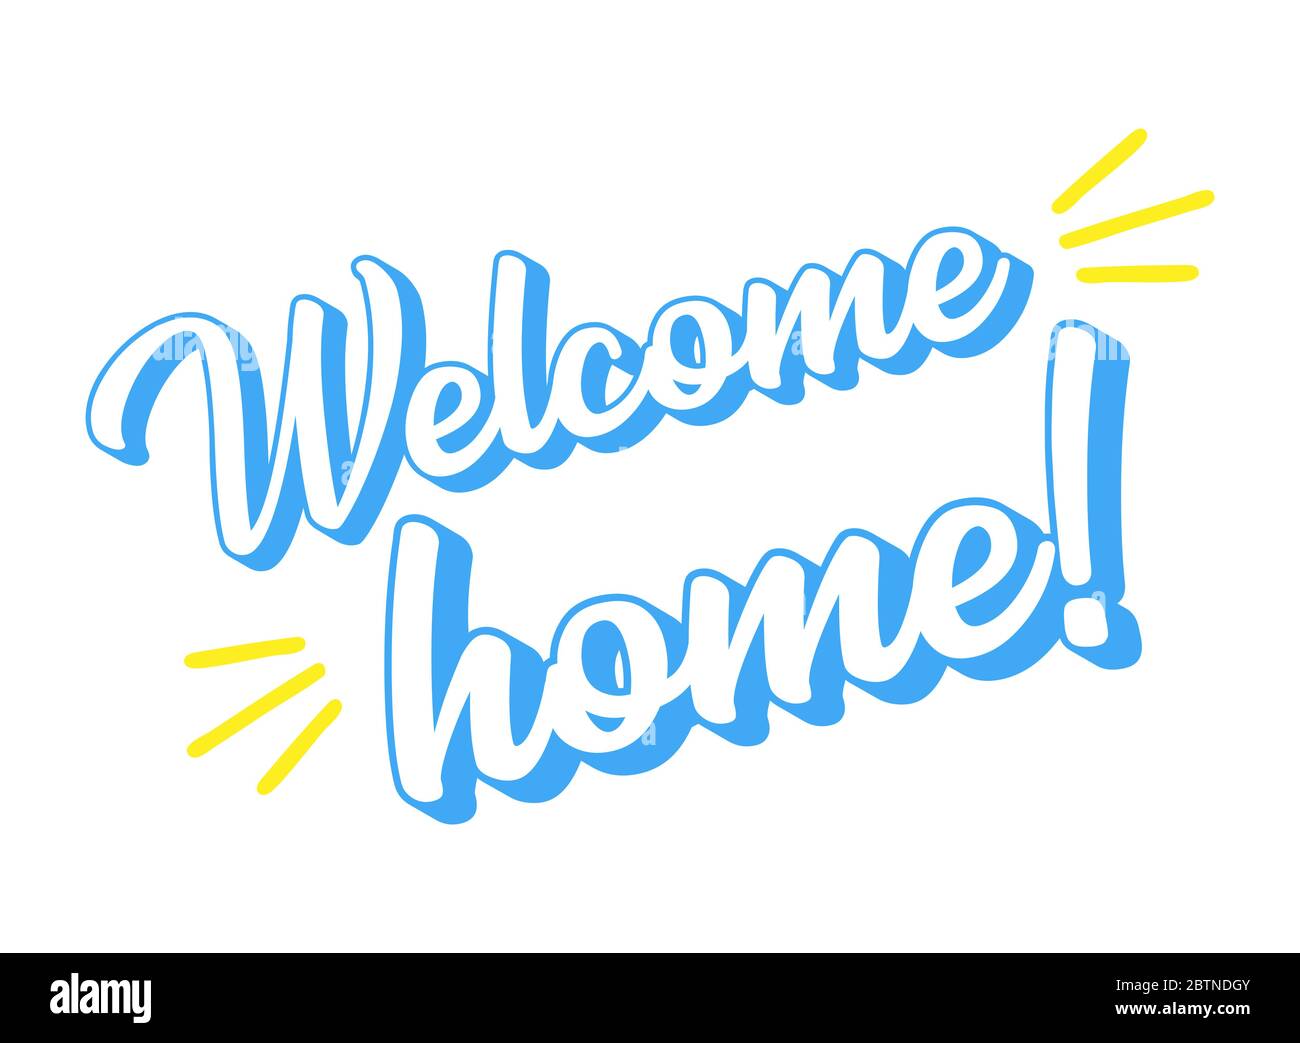 Welcome Home Stock Illustrations – 14,624 Welcome Home Stock